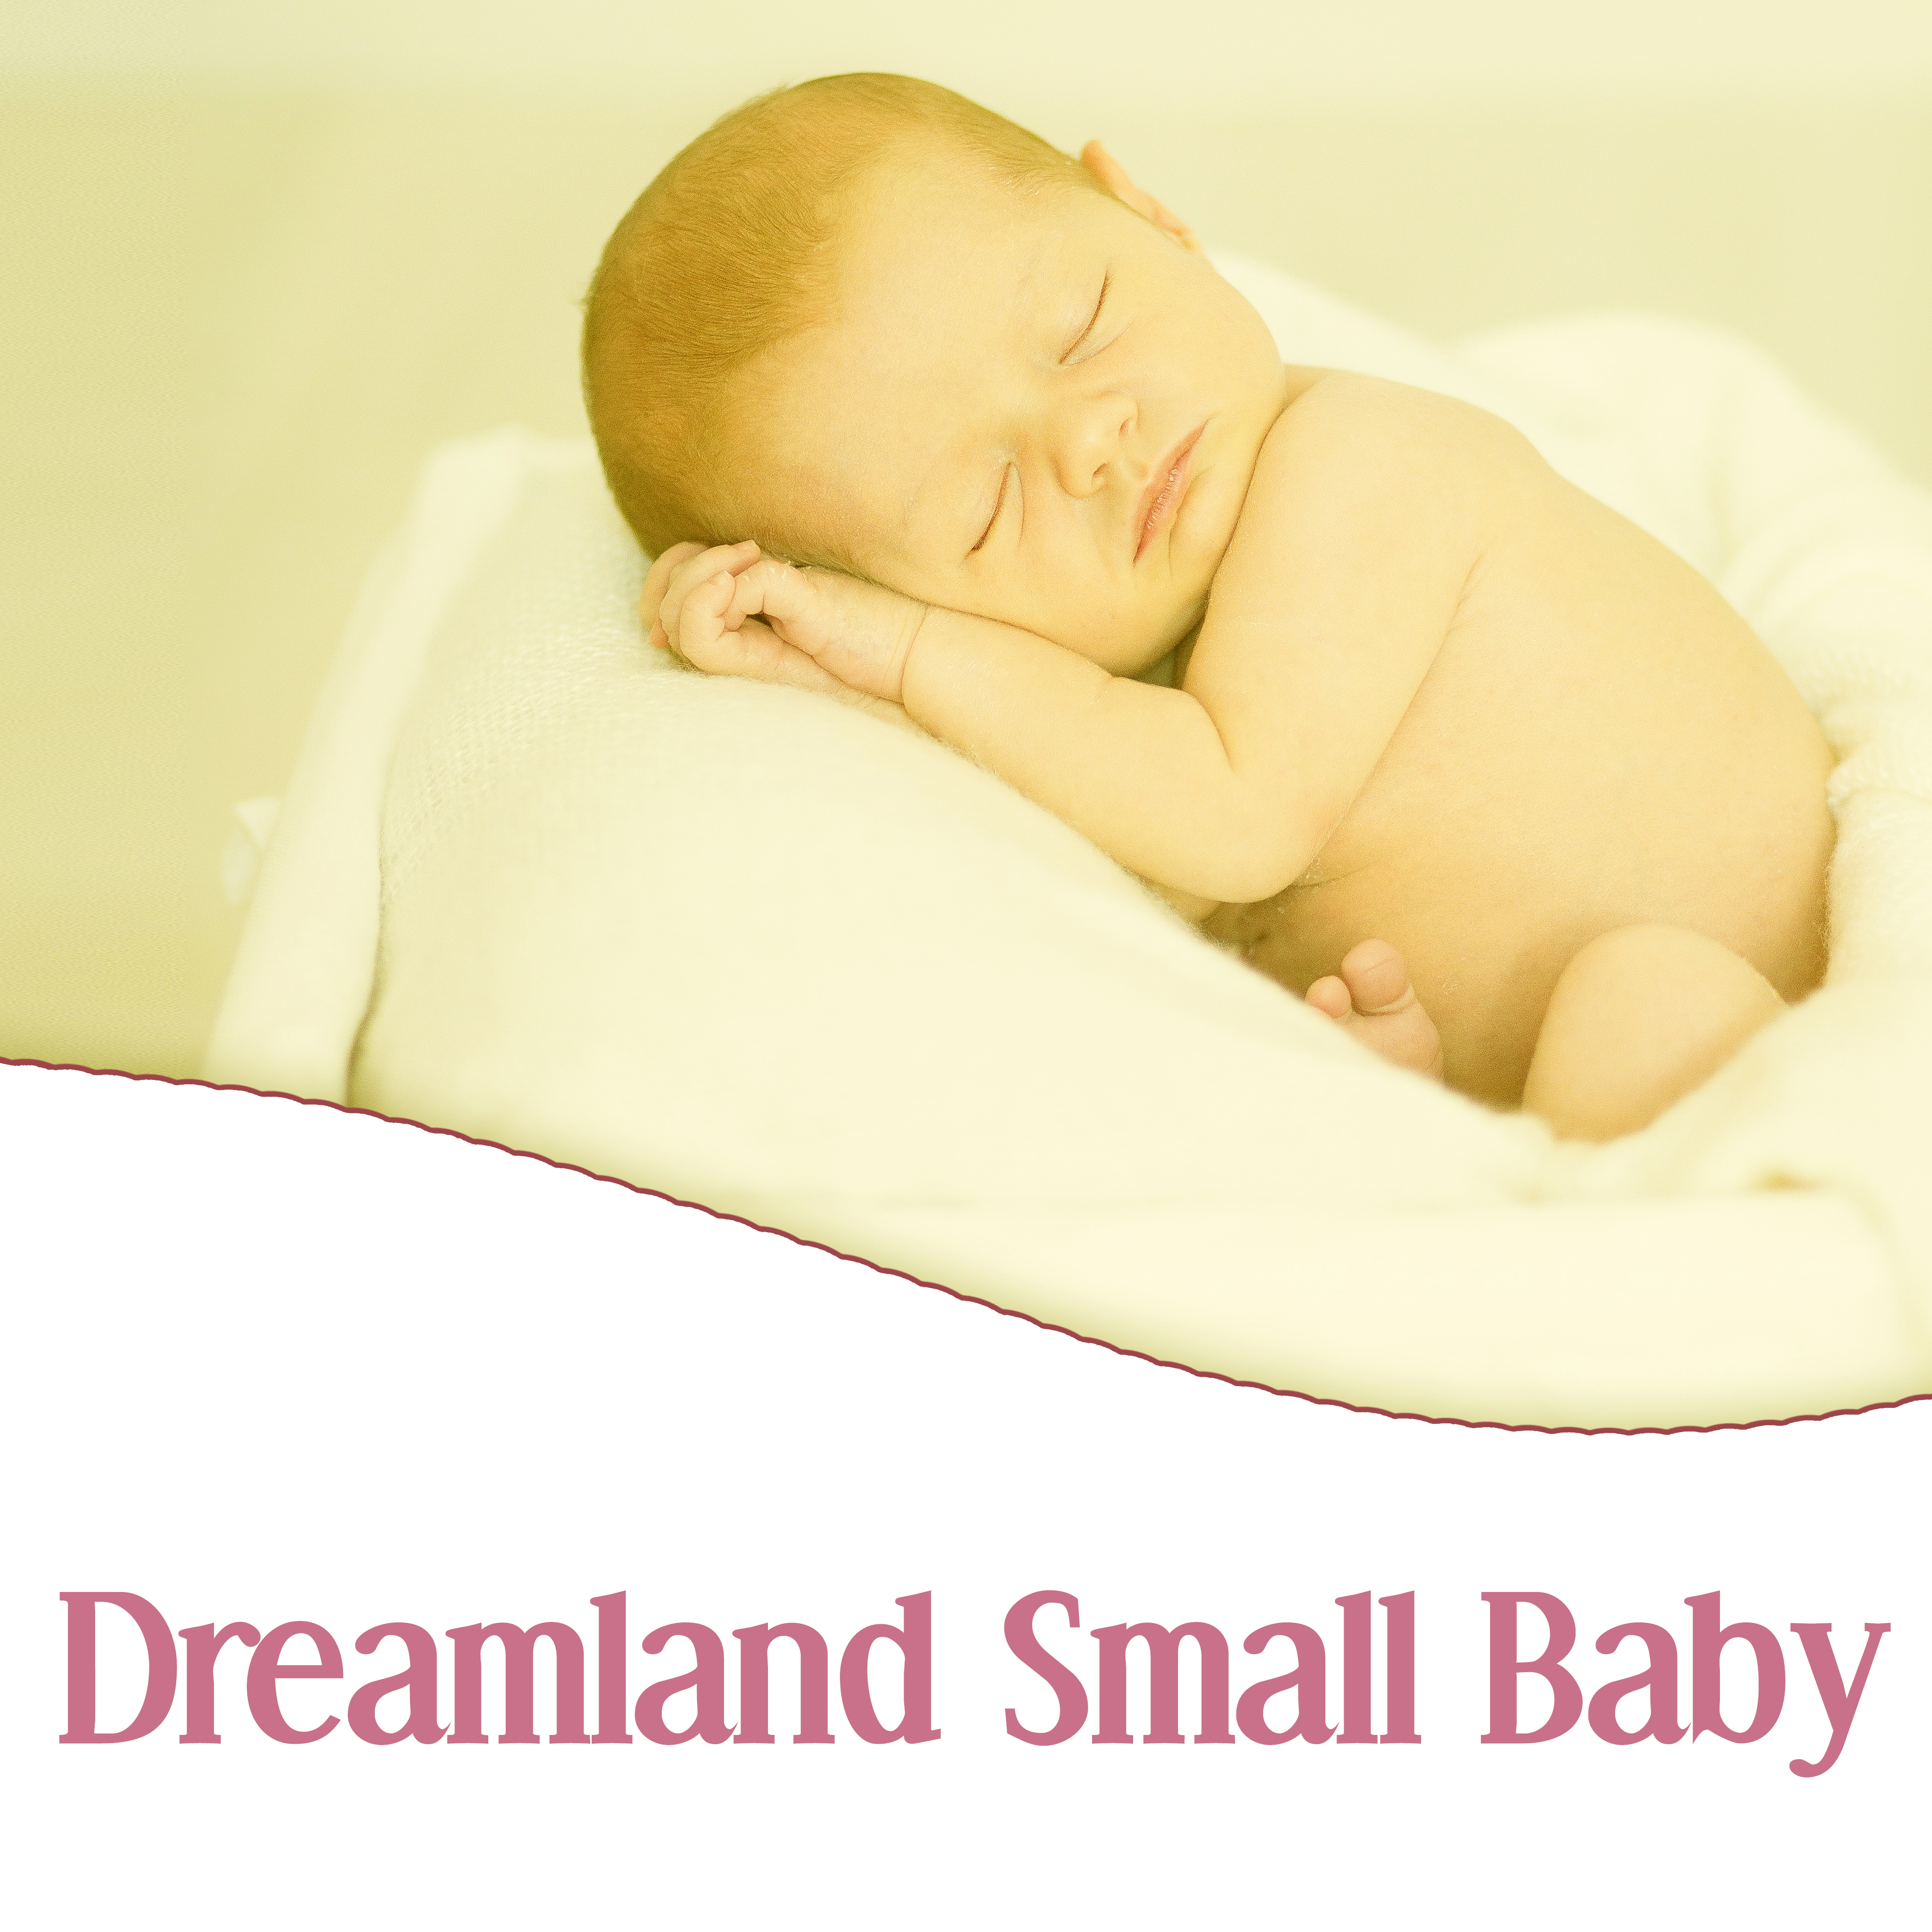 Dreamland Small Baby  Lullabies for Babies, Classical Music to Sleep, Sweet Melodies for Baby, Calm Music, Schubert, Bach, Mozart